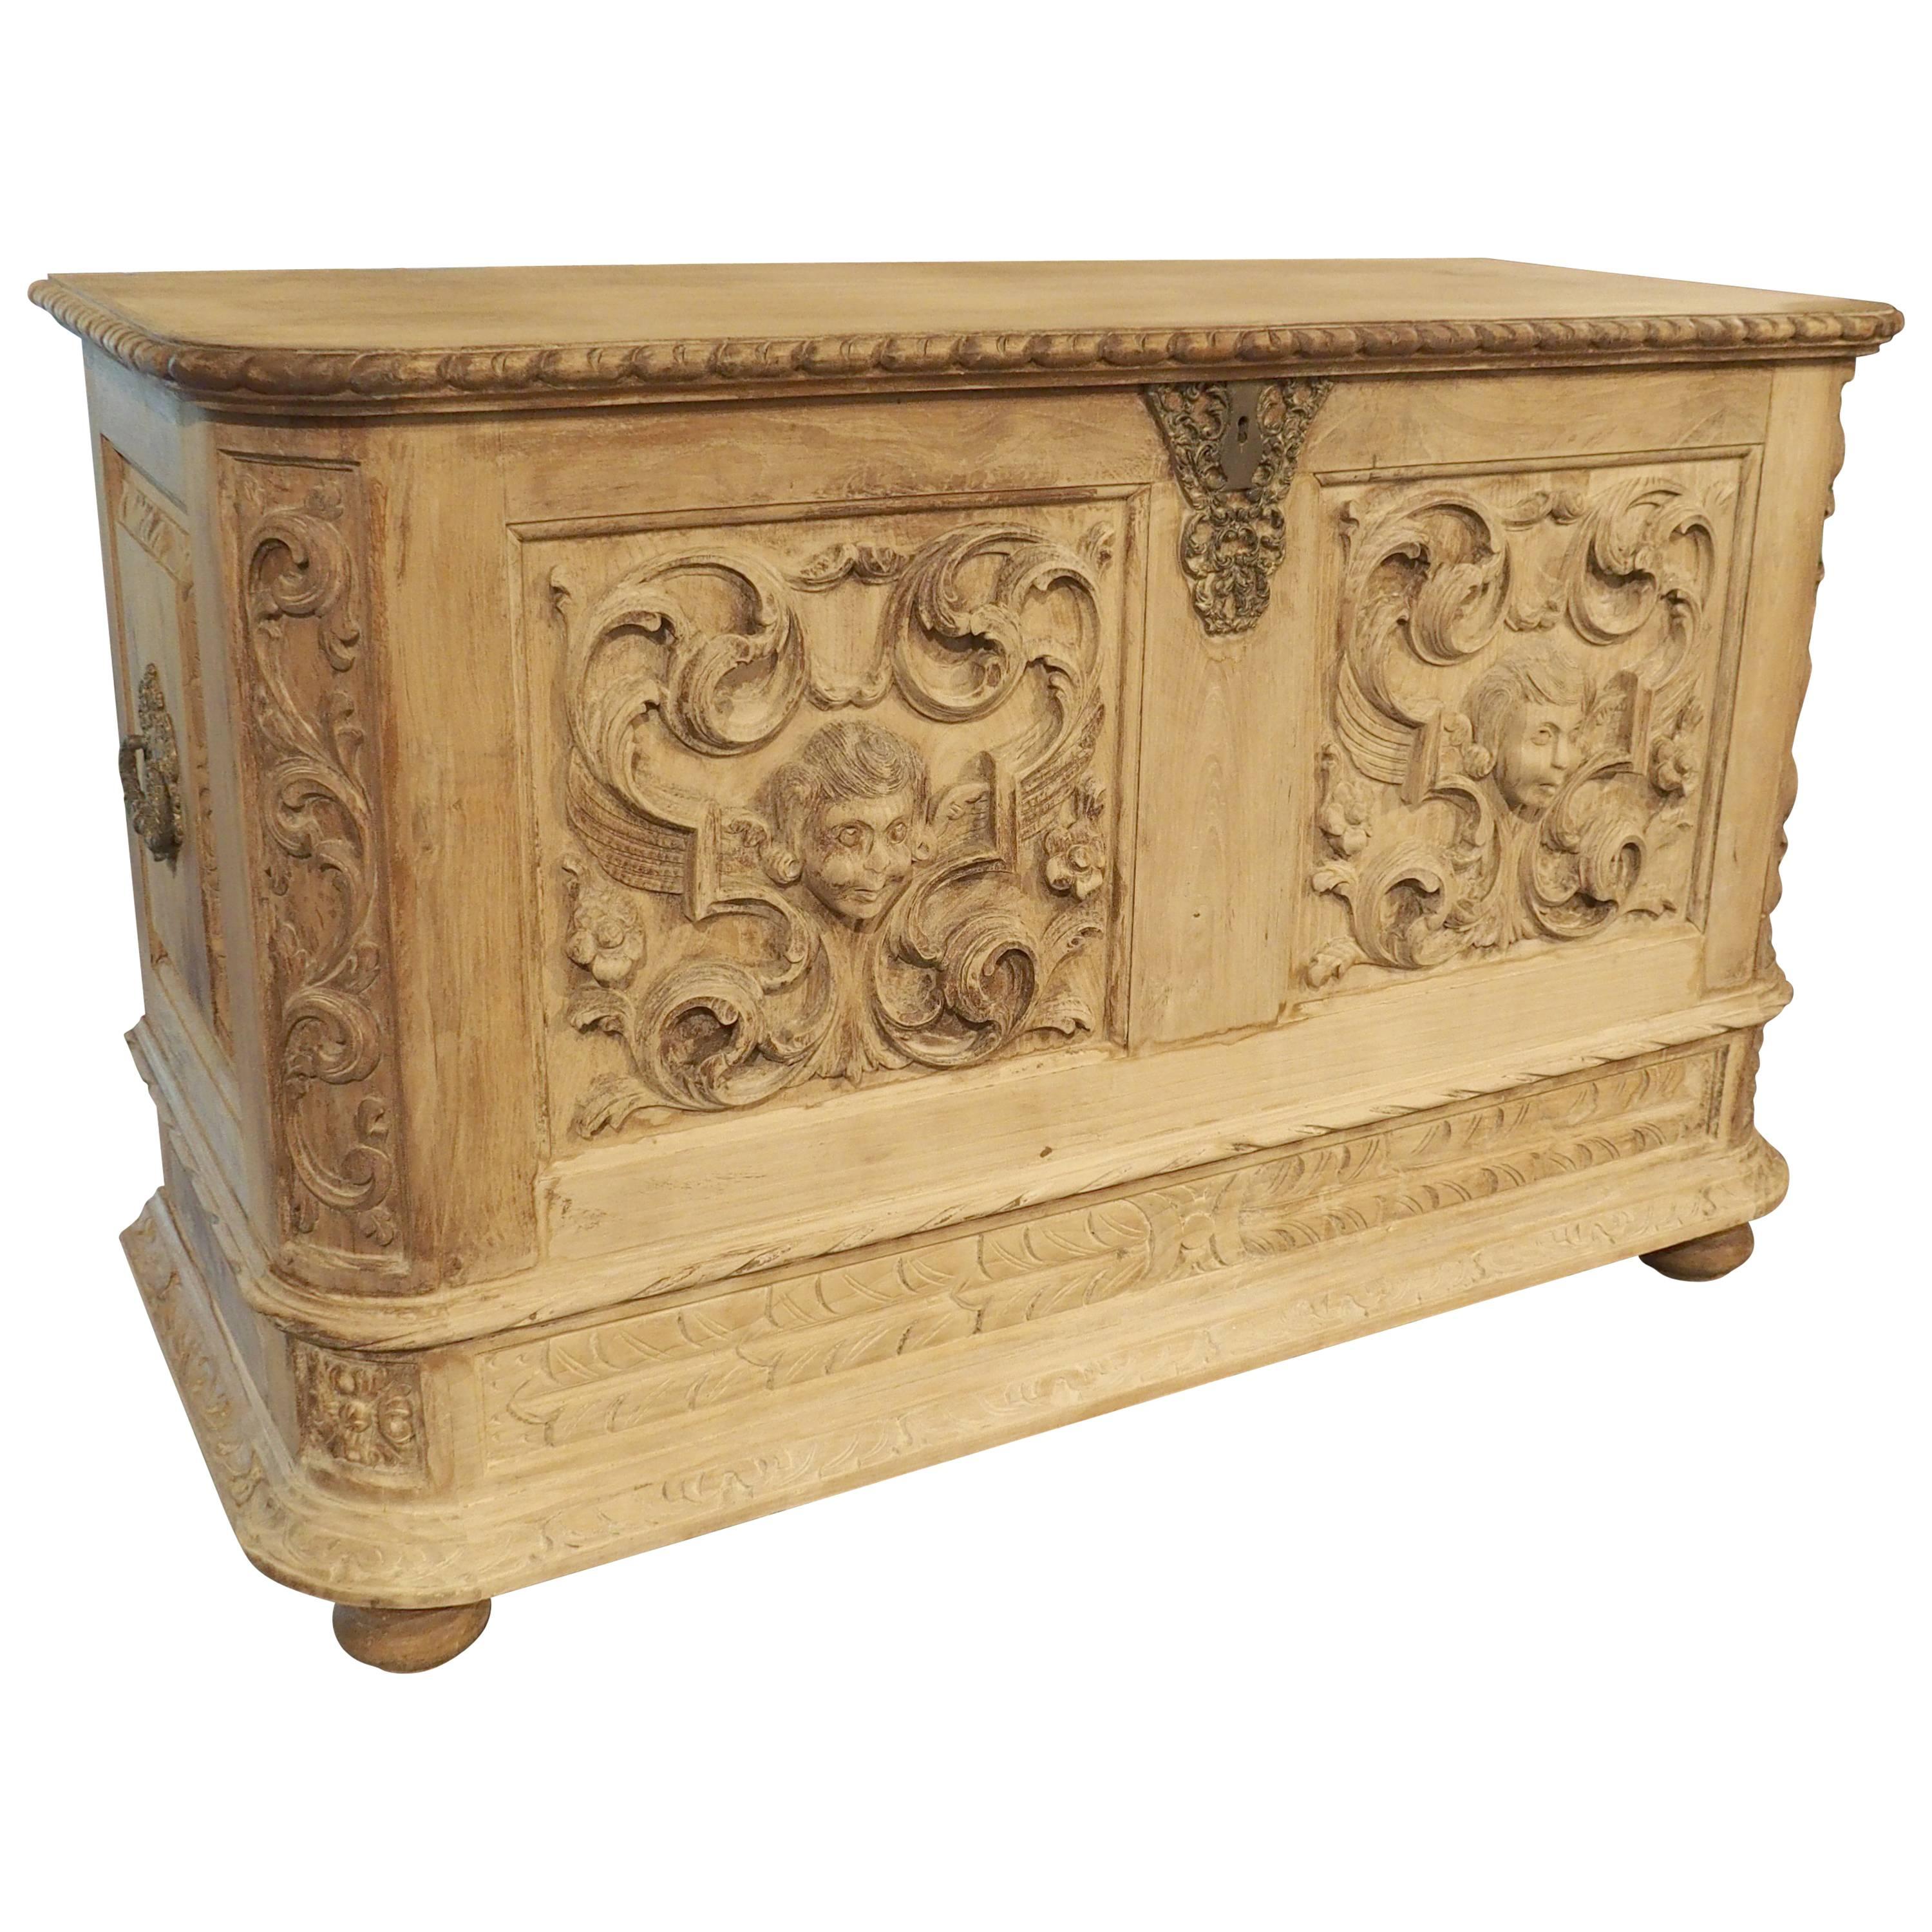 Well-Carved Stripped Trunk from Italy